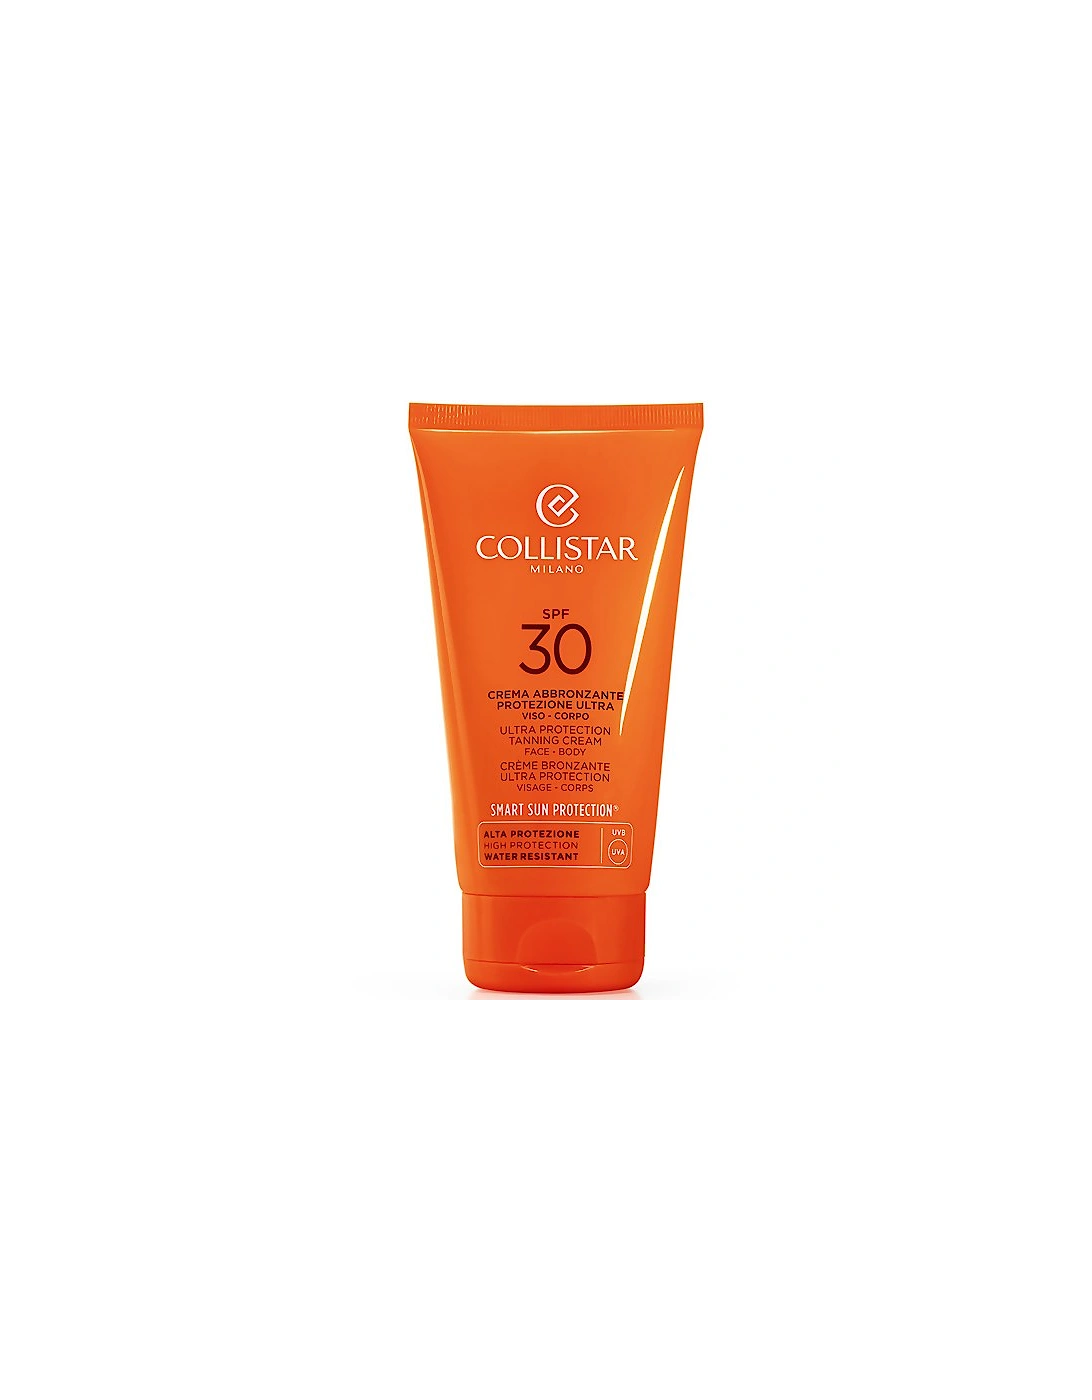 Ultra Protection Tanning Cream SPF 30 150ml, 2 of 1